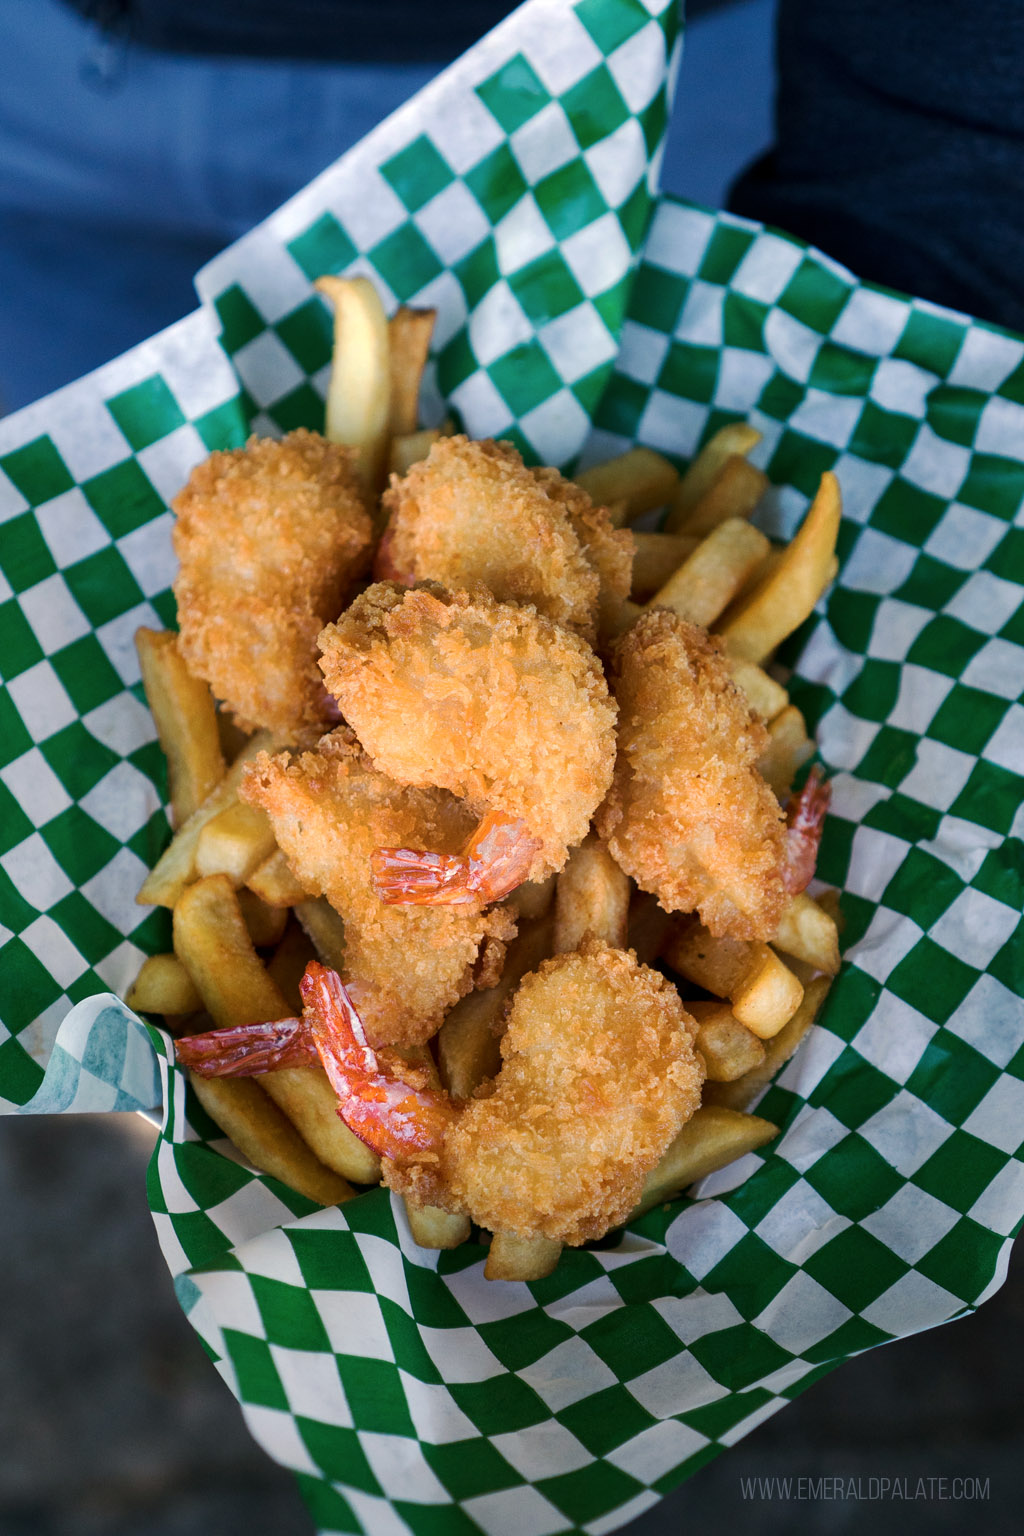 popcorn shrimp and fries from a Seattle Black-owned restaurant